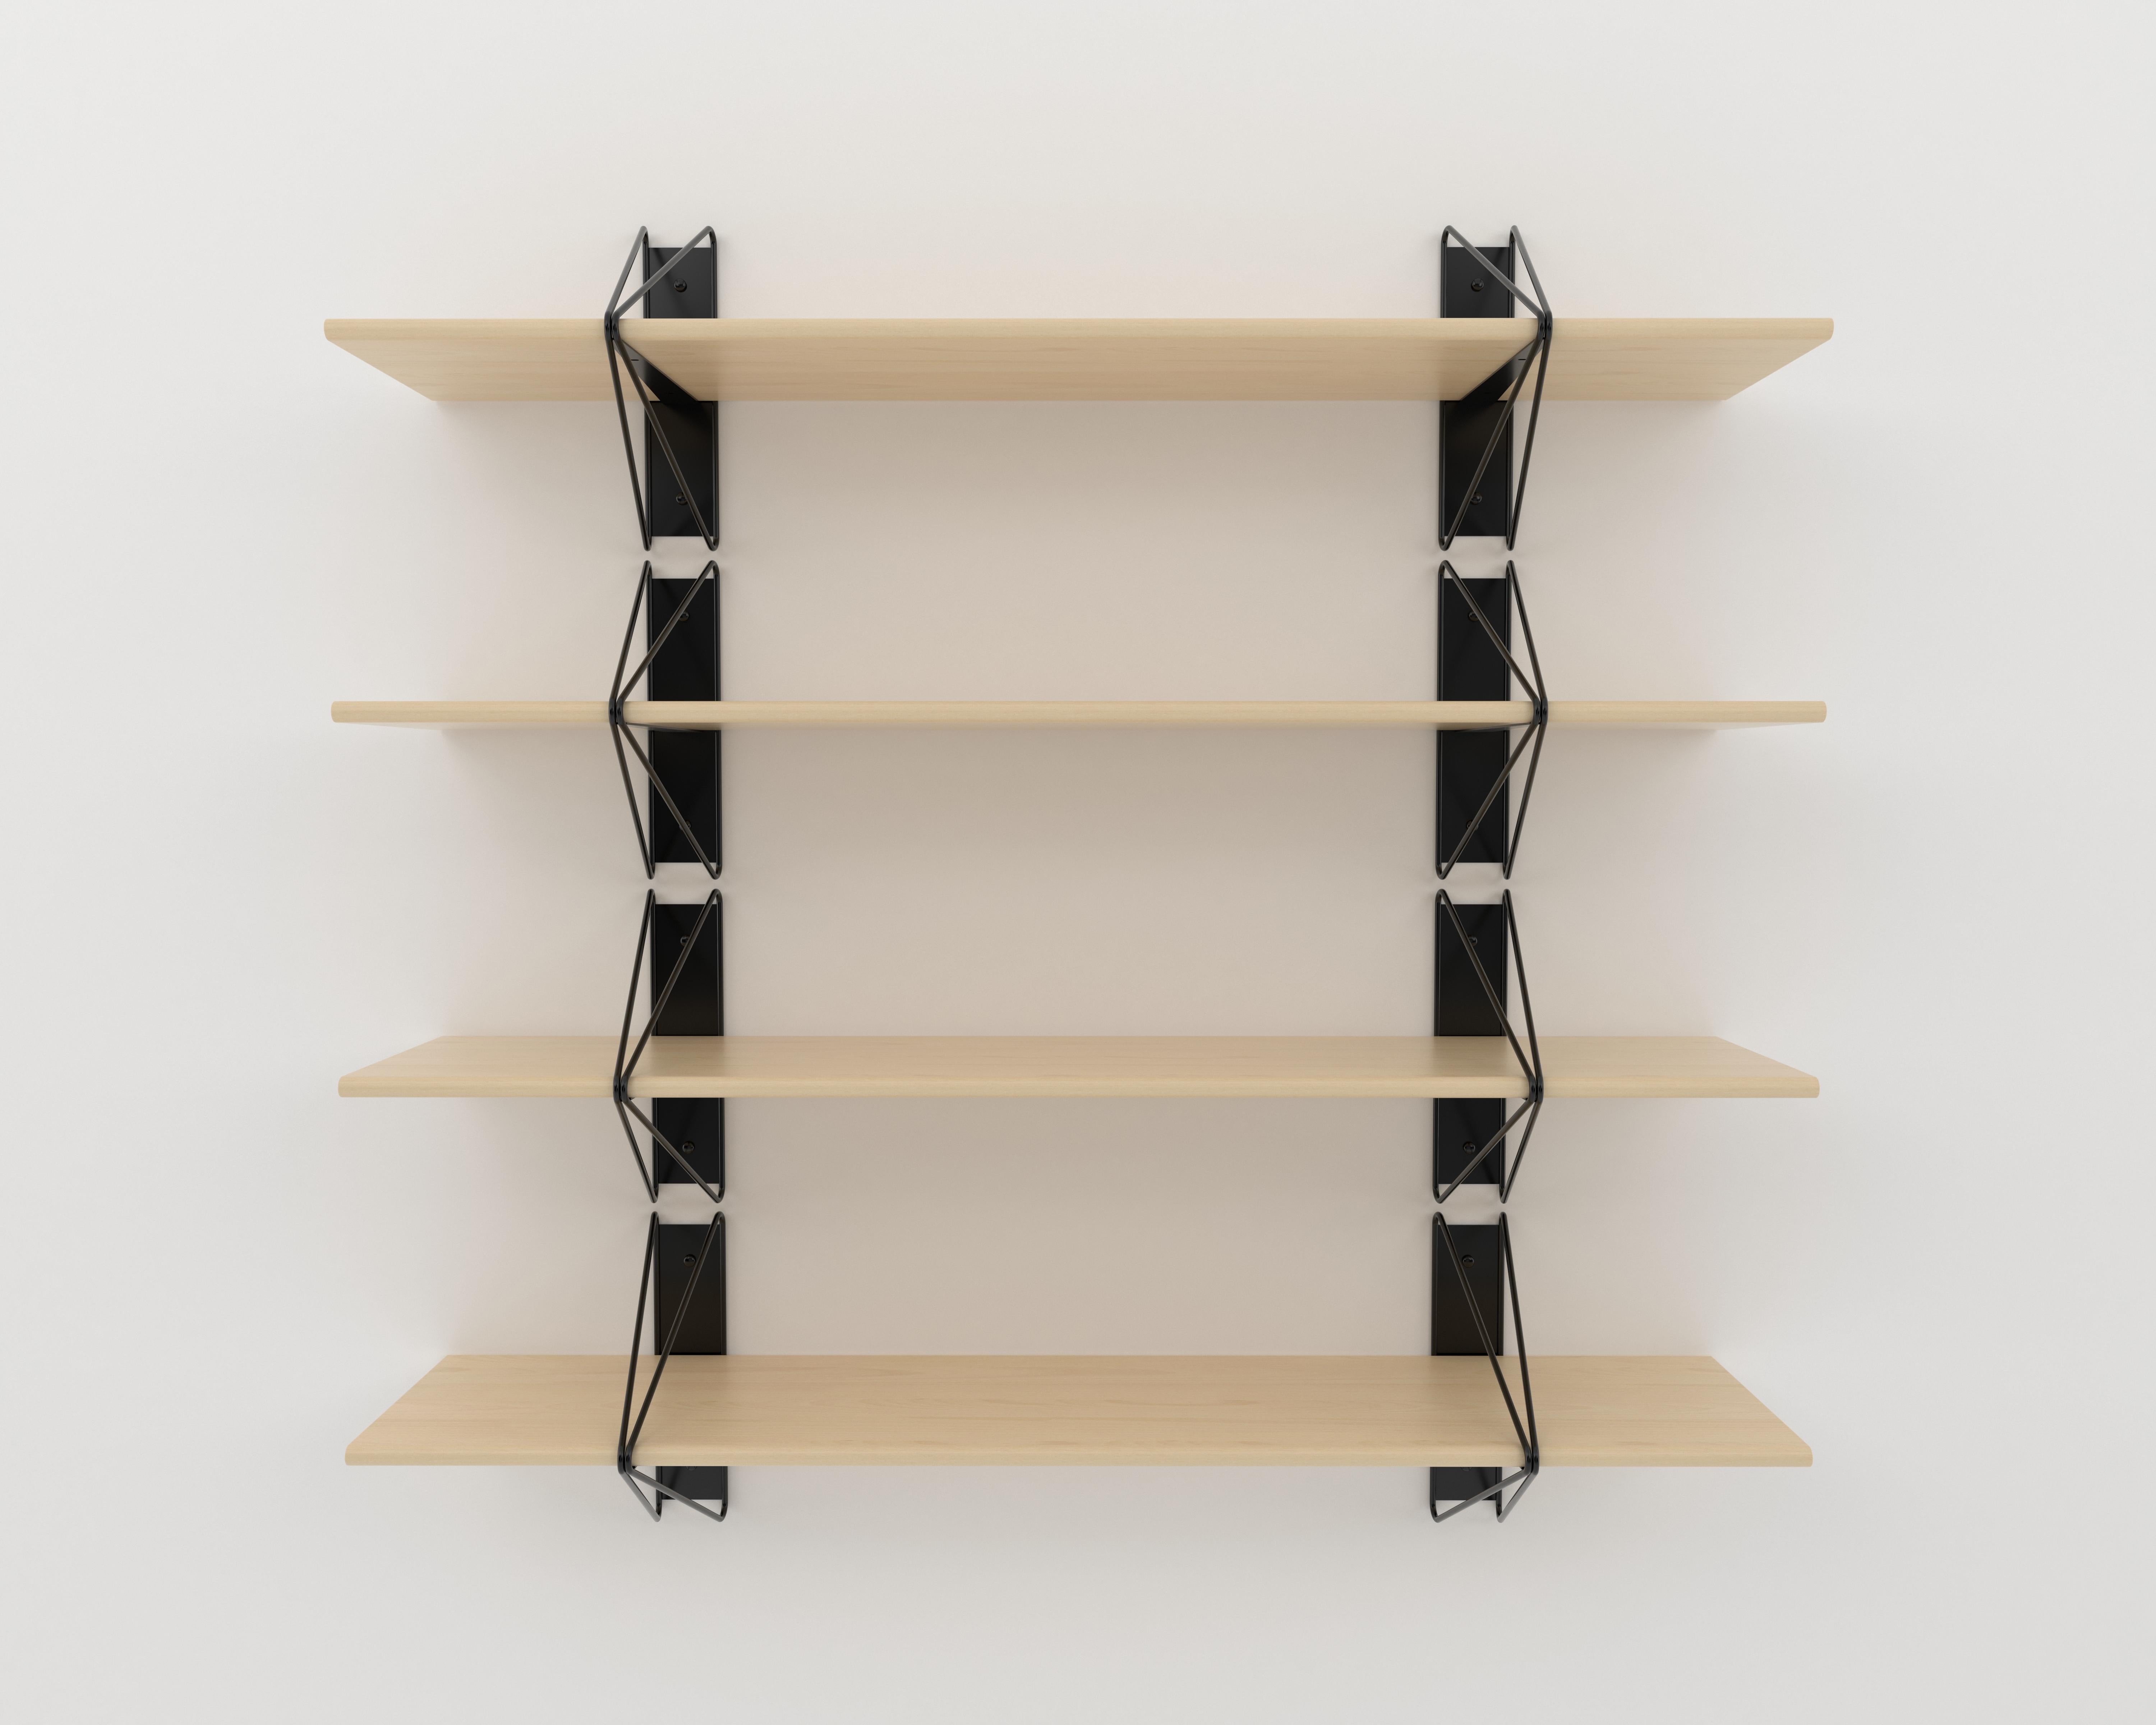 Powder-Coated Set of 2 Strut Shelves from Souda, Black and Maple, Made to Order For Sale